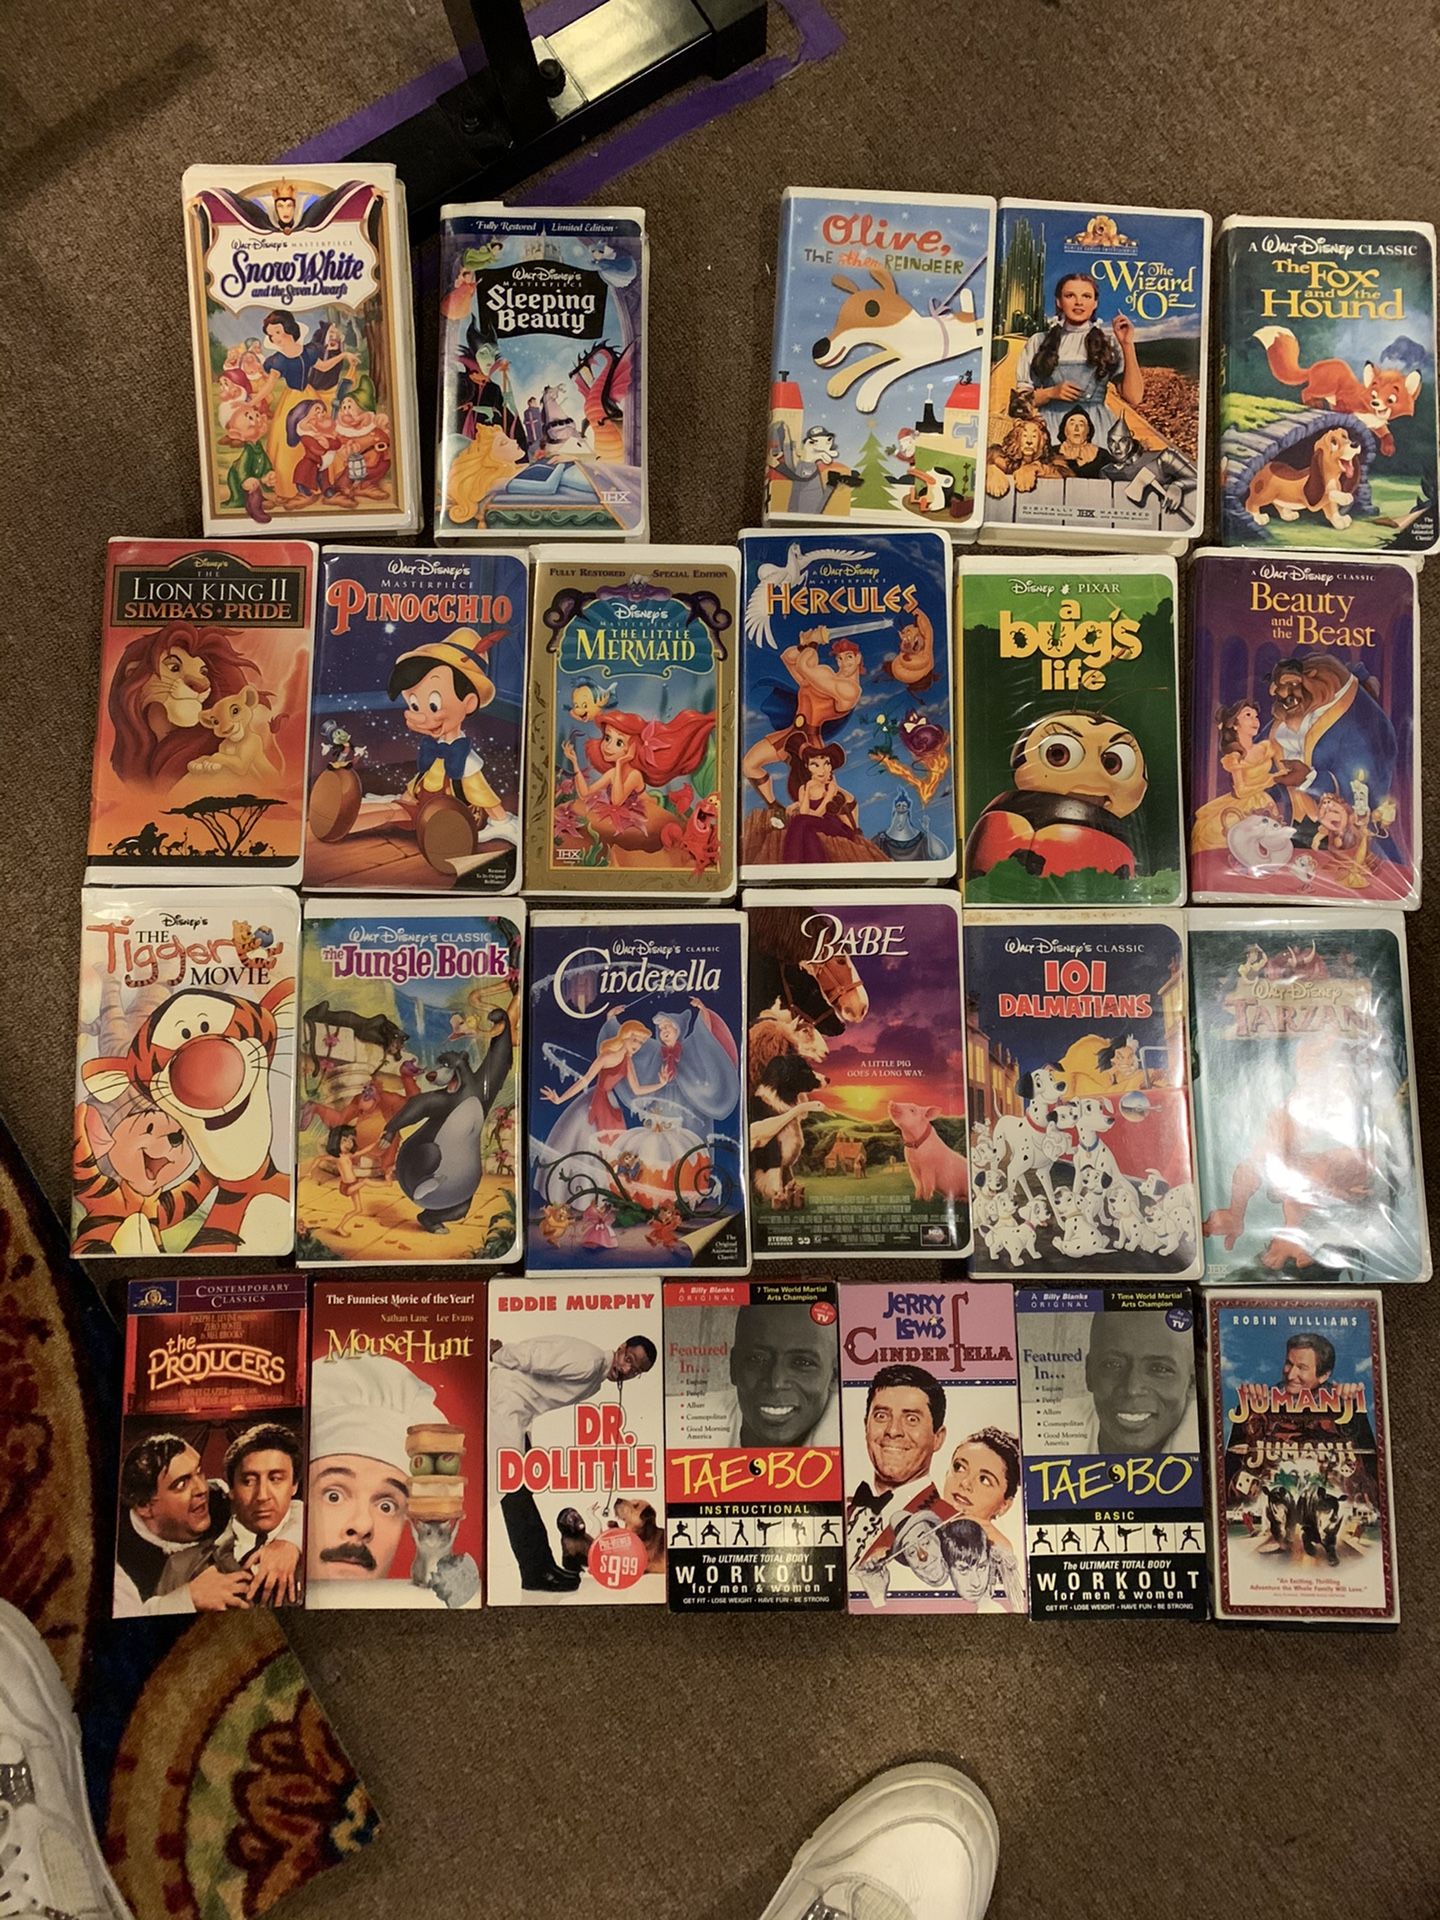 Classic Disney movies and family fun movies VHS tapes